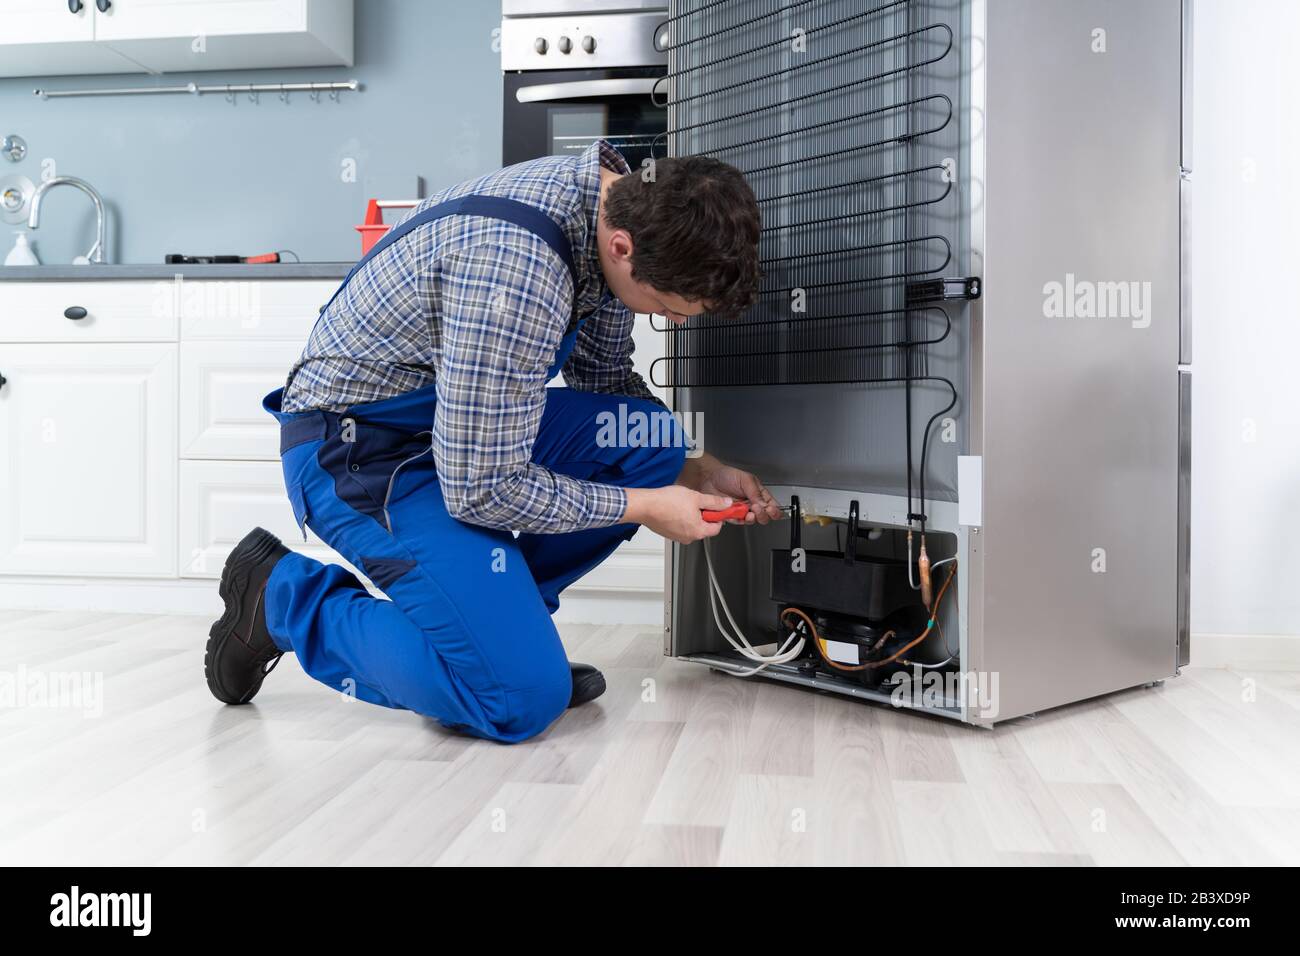 Male Worker Repairing Refrigerator With Screwdriver In House Stock Photo